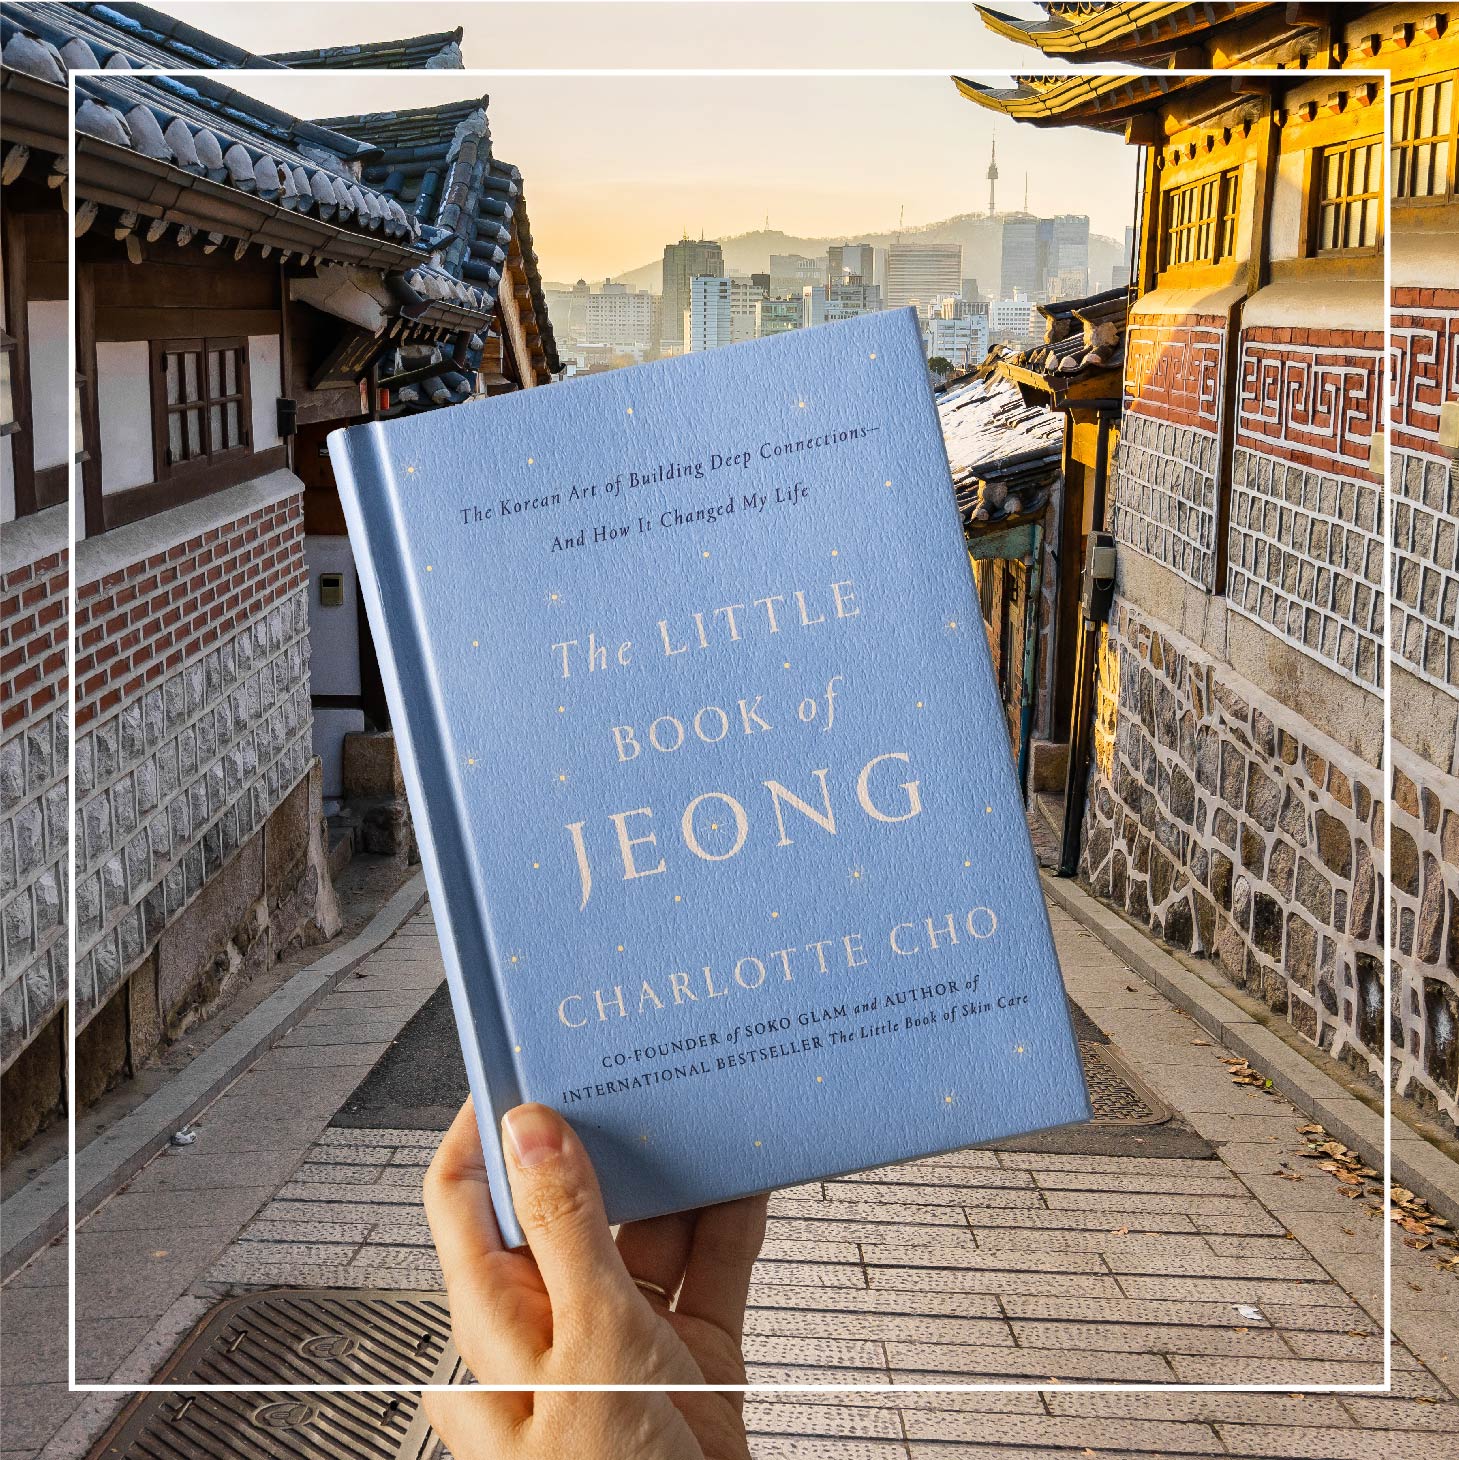 The Little Book of Jeong in seoul